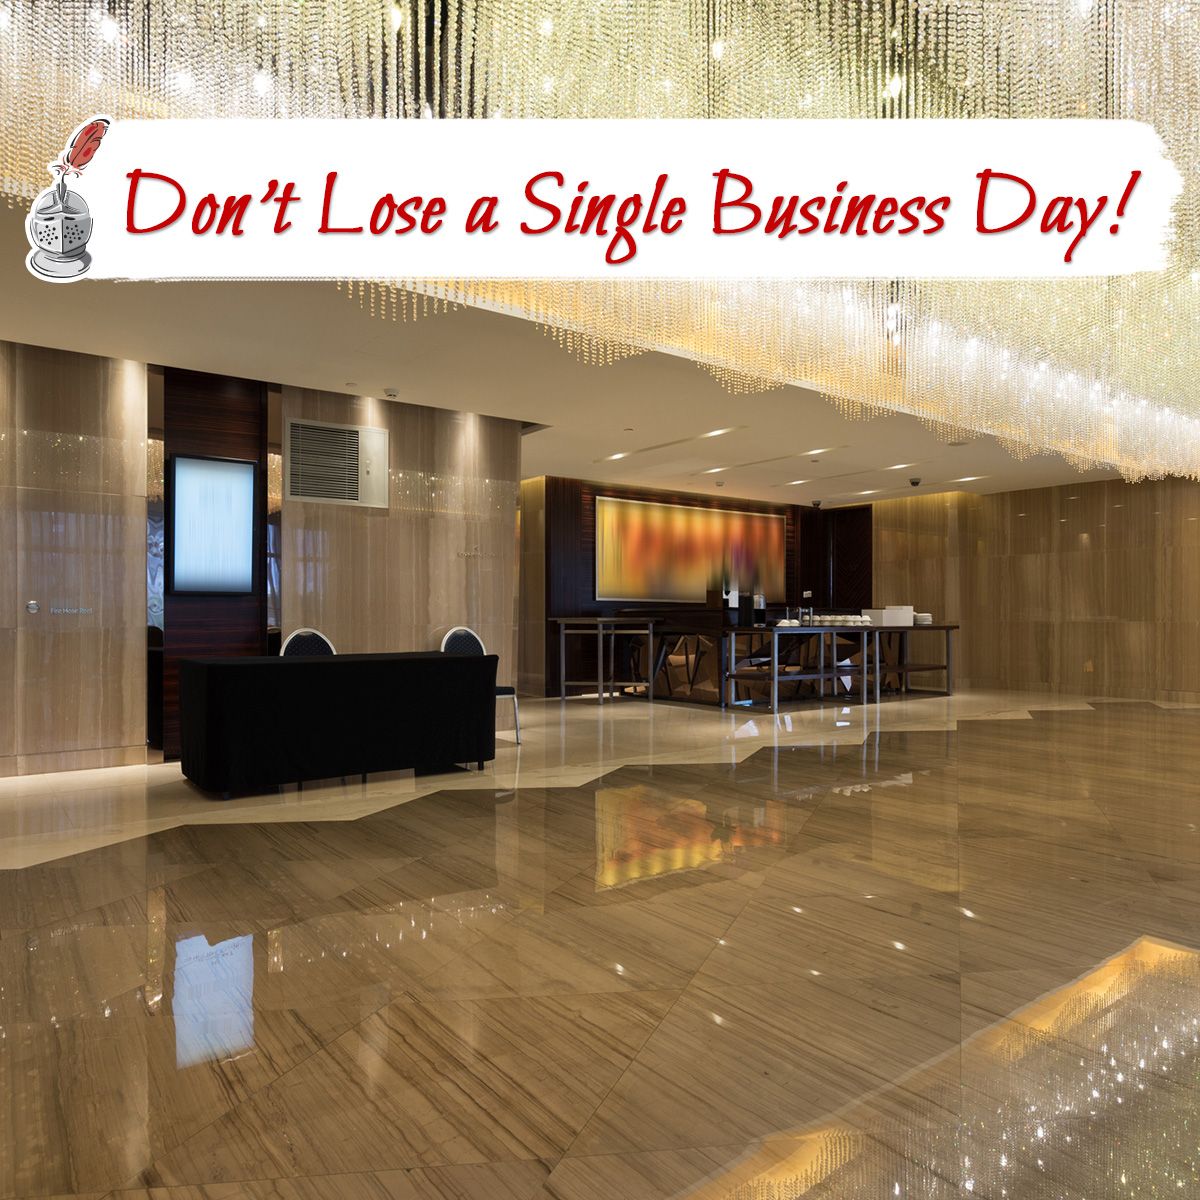 Don't Lose a Single Business Day!